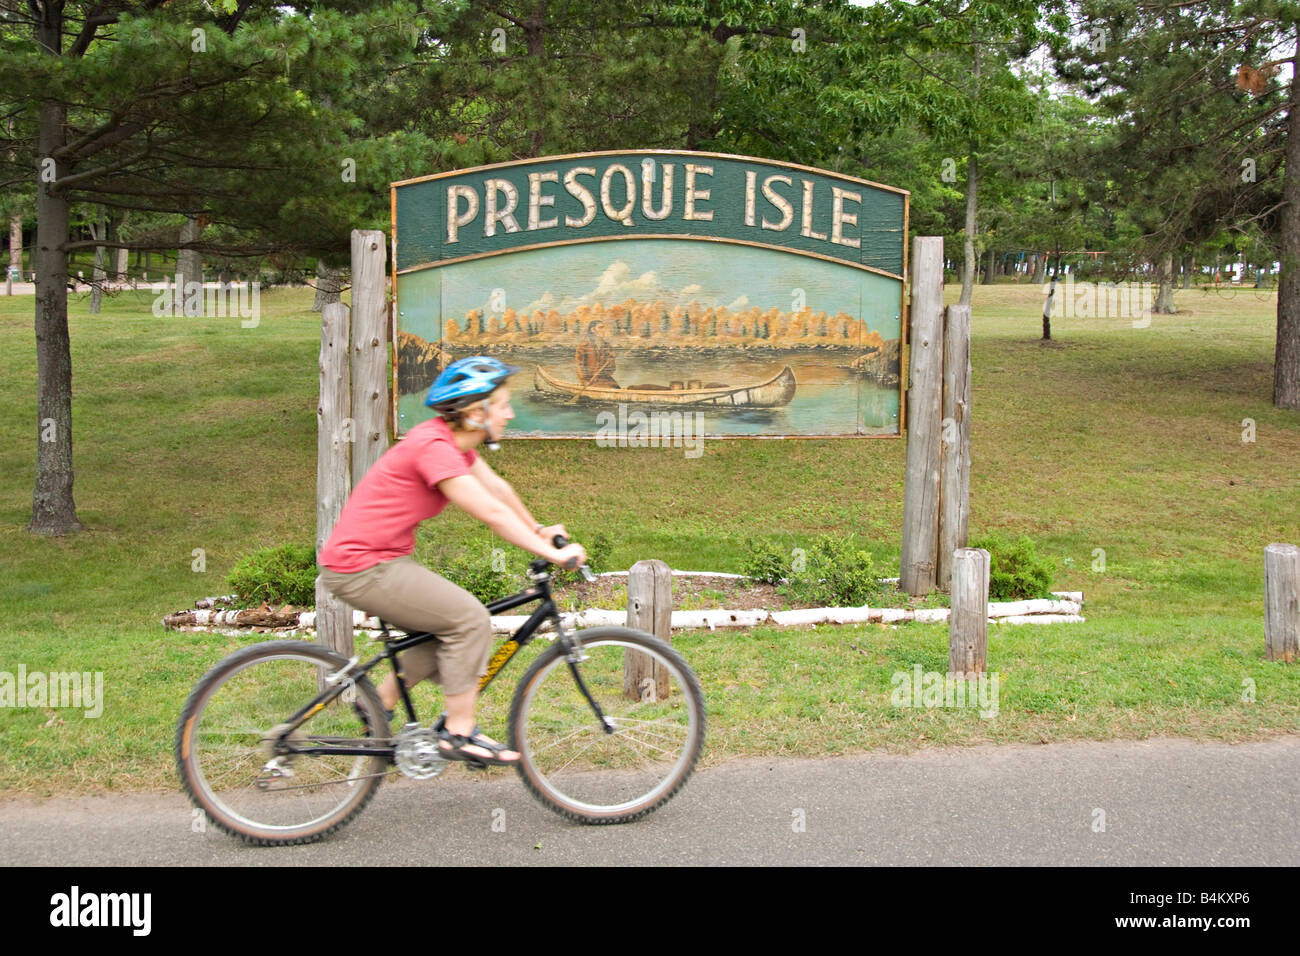 A bicyclist at the entrance to Presque Isle Park in Marquette Michigan Stock Photo